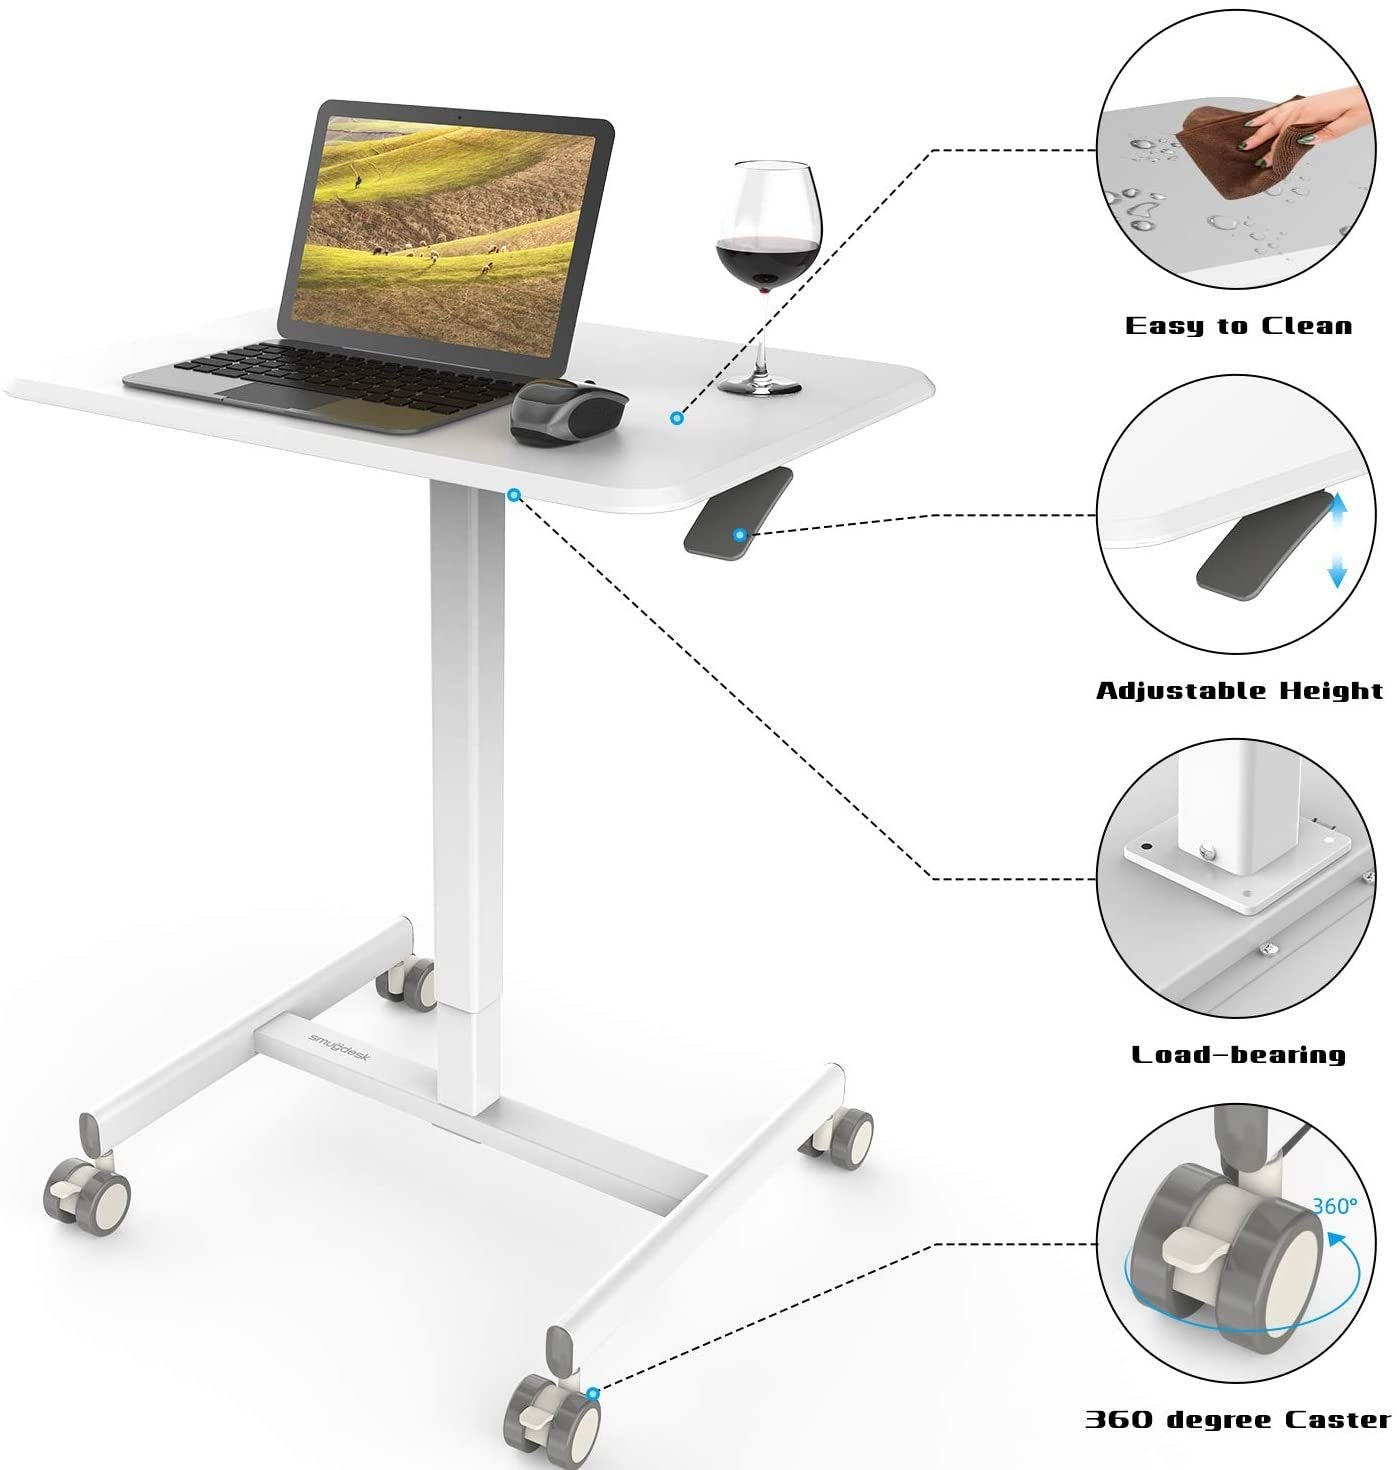 Mobile Sit-Stand Desk Adjustable Height Laptop Desk Cart Ergonomic Table Small Standing Desk with Pneumatic Height Adjustments, Black,White